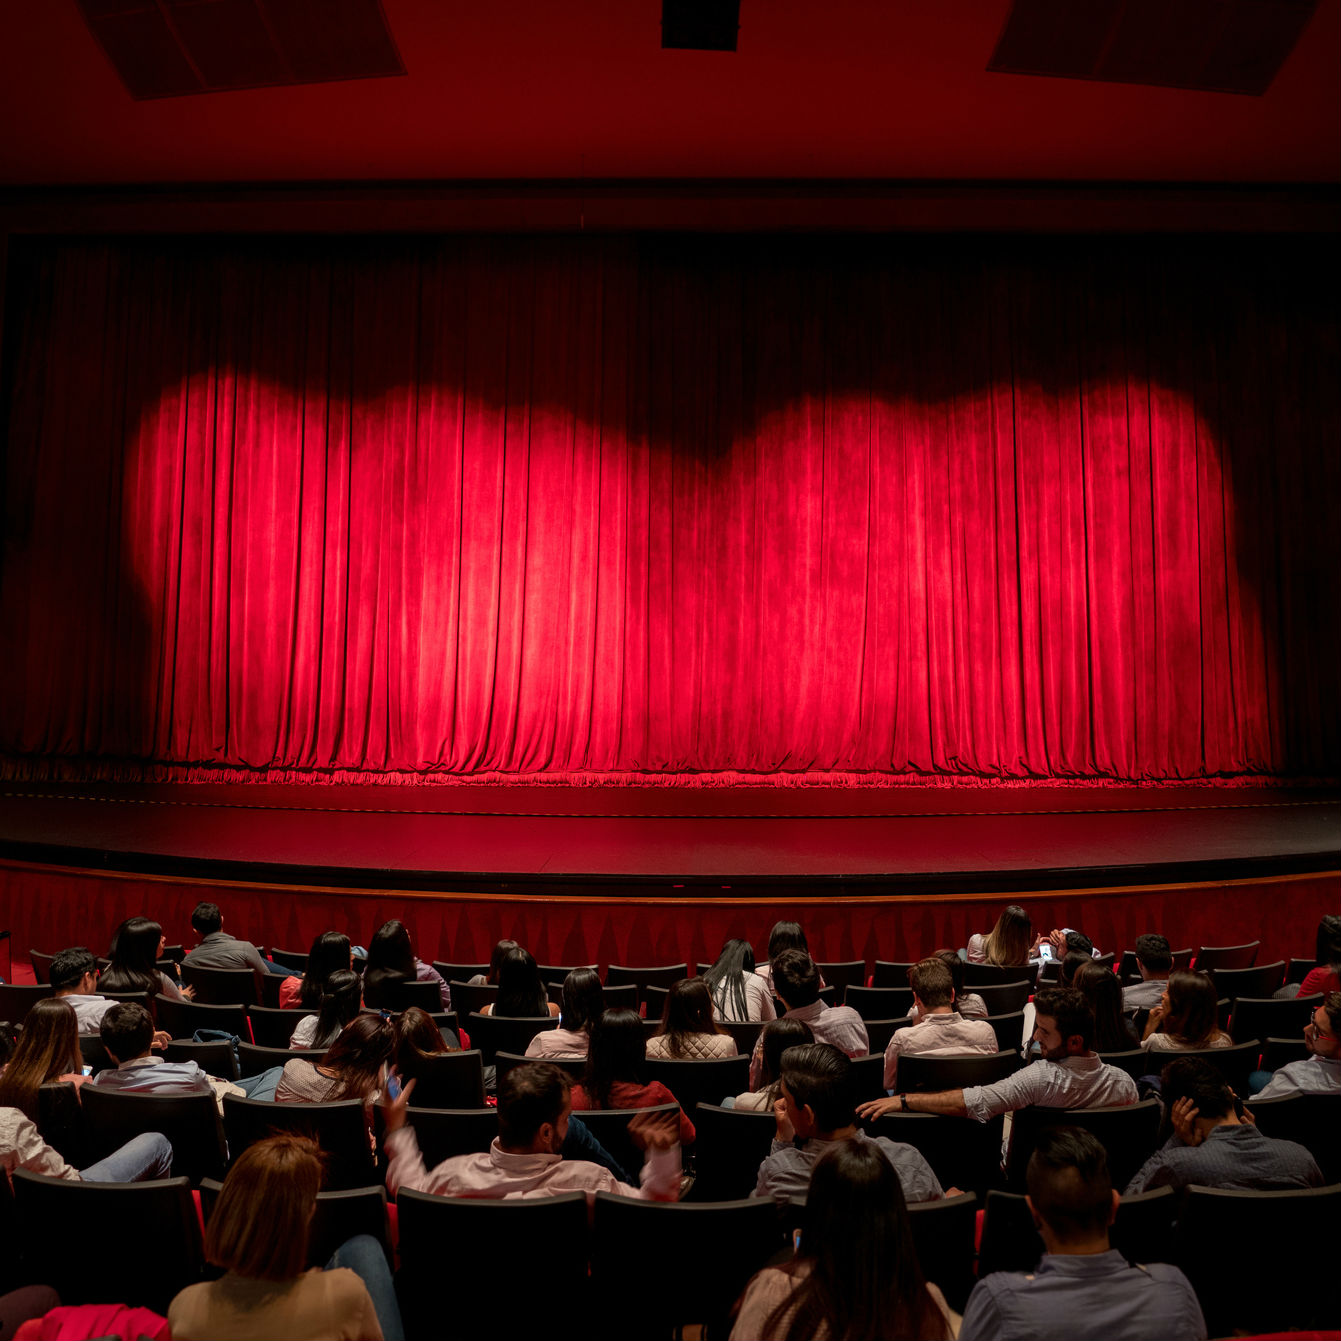 People sitting the theatre seats of a stage with the red curtain closed